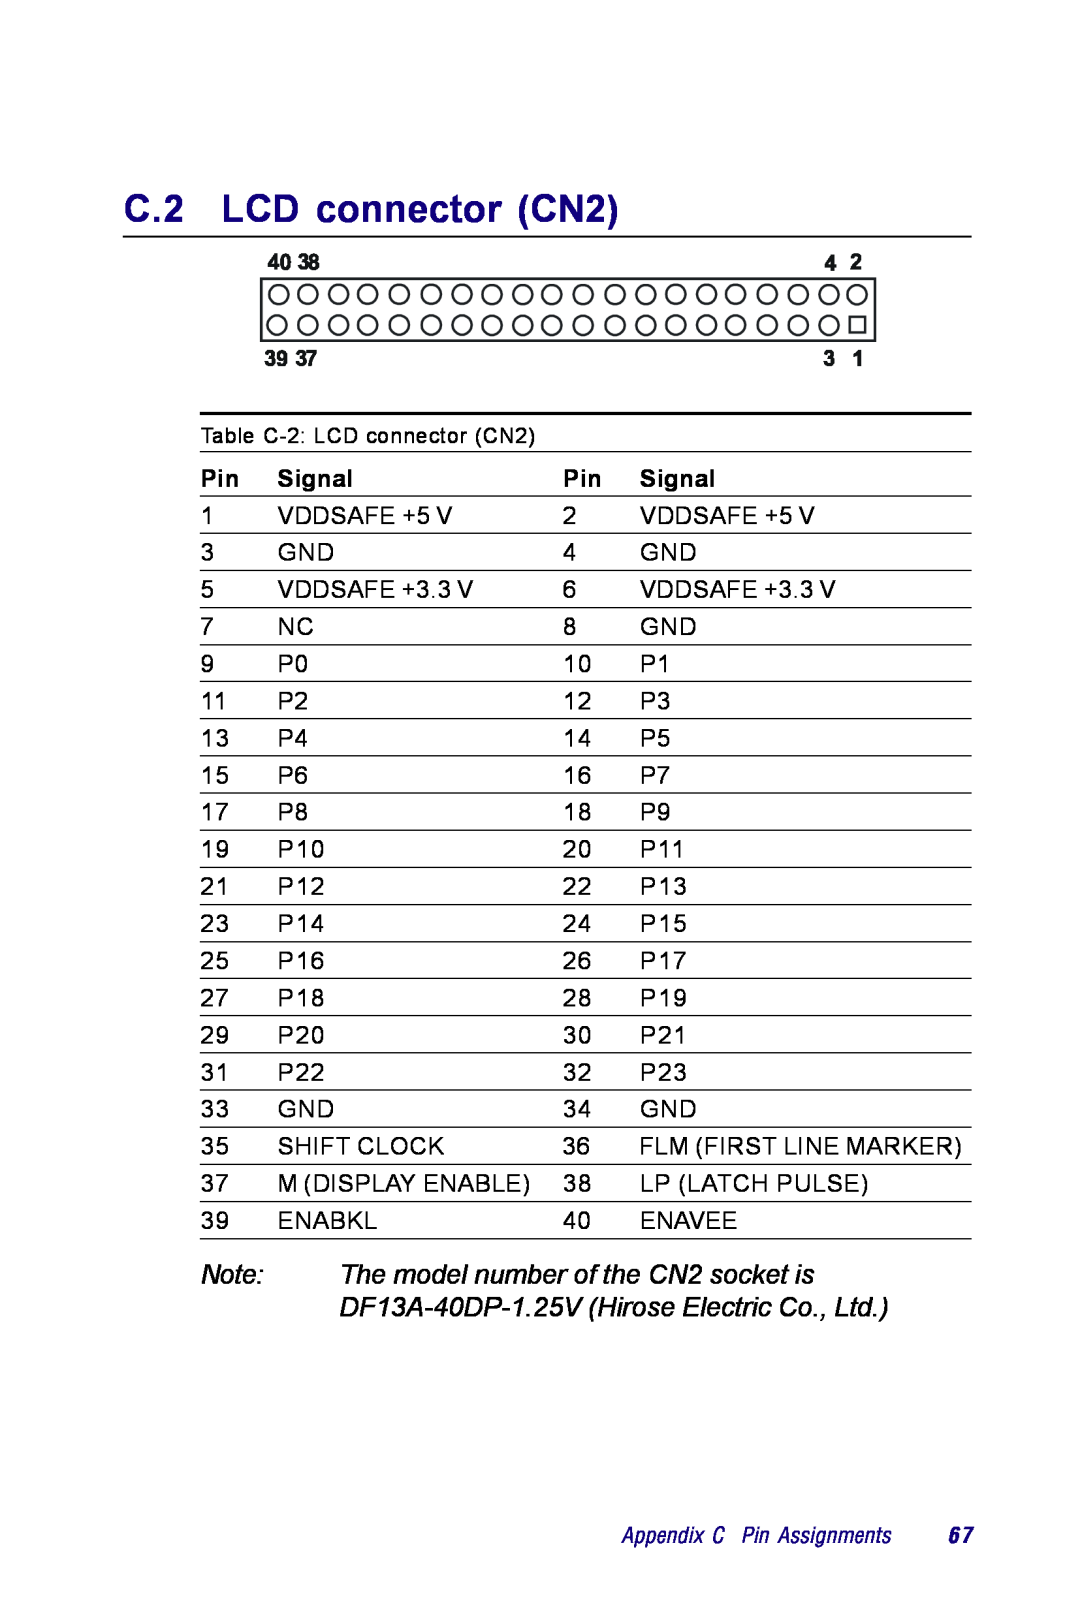 Advantech PCM-3350 Series user manual C.2 LCD connector CN2, The model number of the CN2 socket is, Signal 